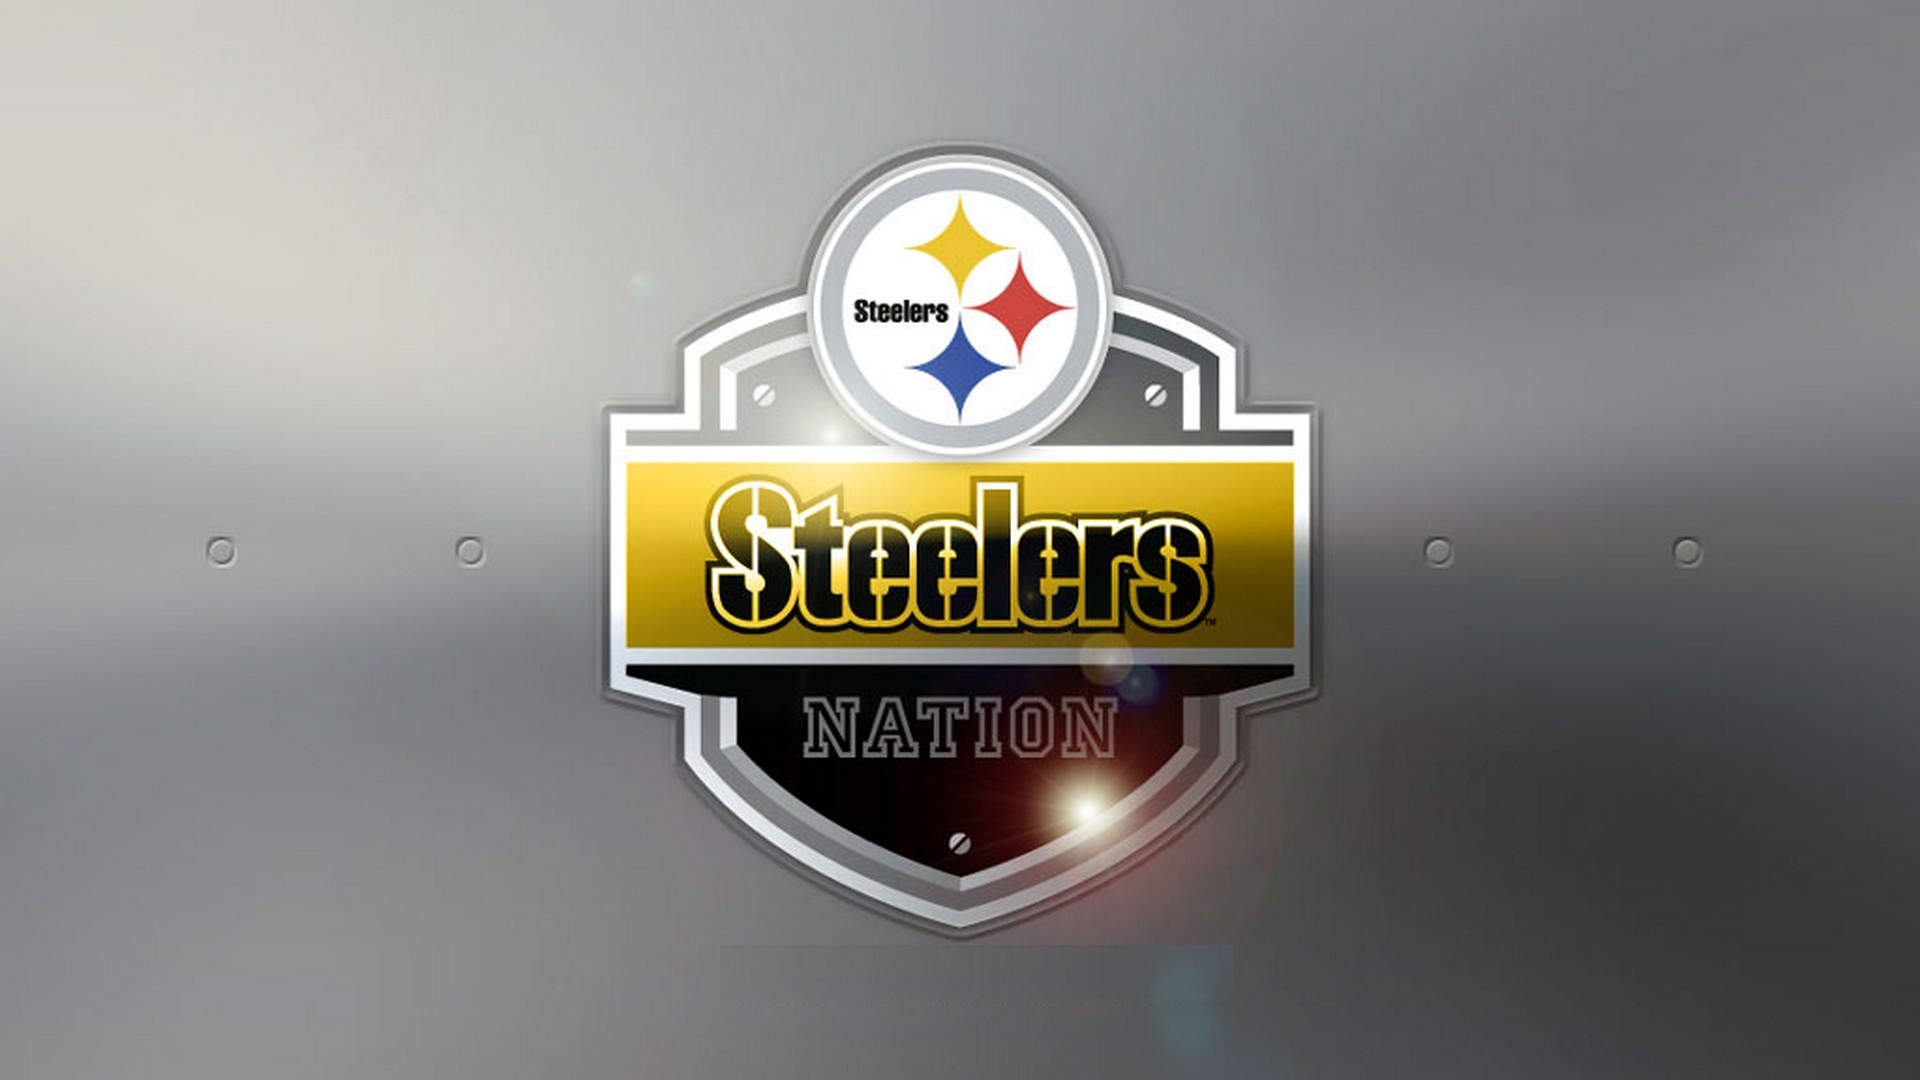 HD Steelers Backgrounds with resolution 1920x1080 pixel. You can make this wallpaper for your Mac or Windows Desktop Background, iPhone, Android or Tablet and another Smartphone device